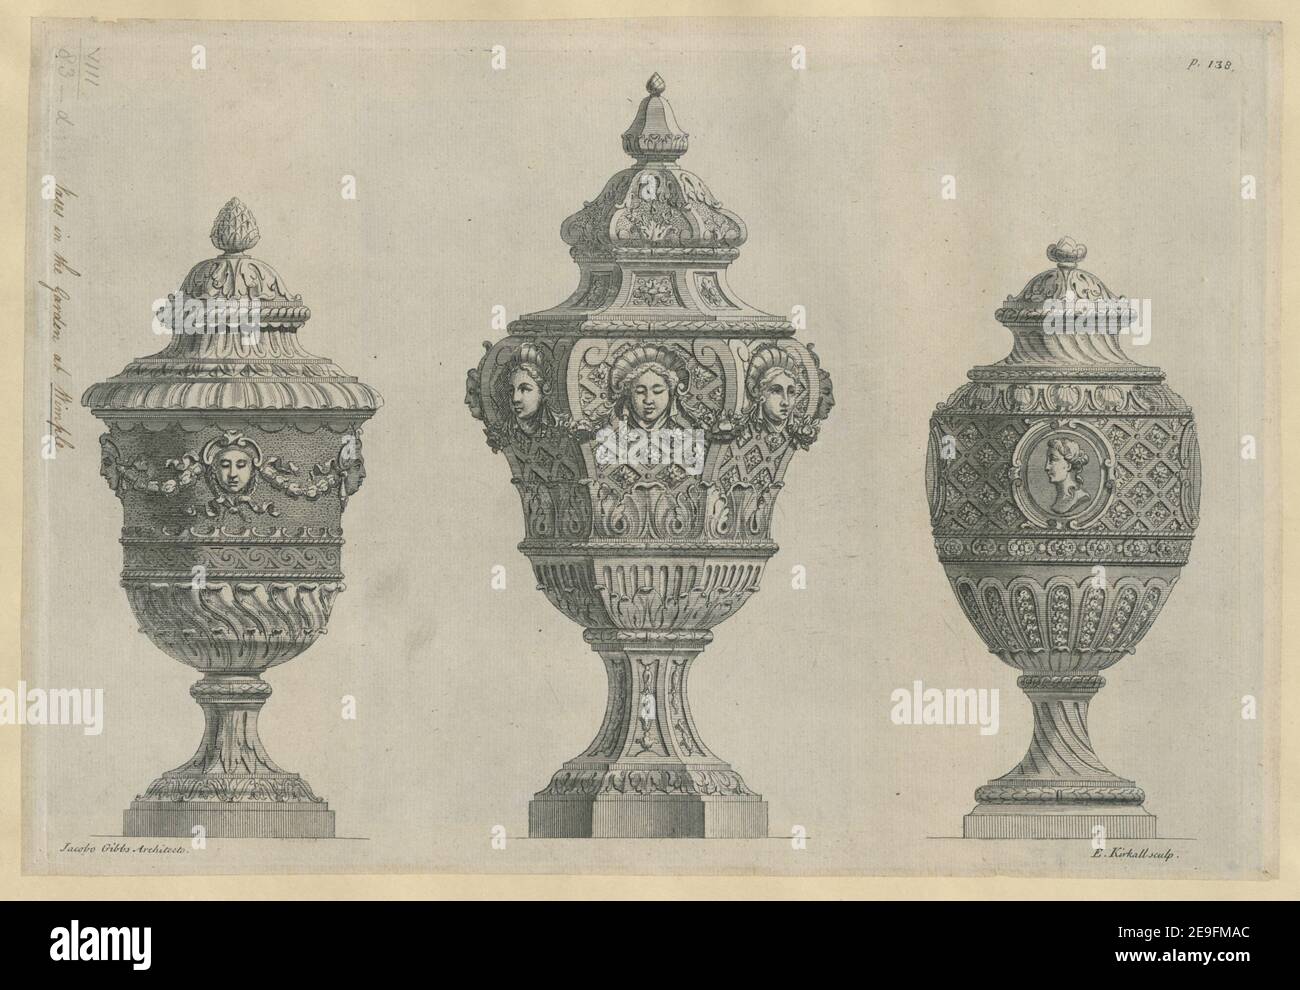 Vases at Wimpole   Author  Kirkall, Elisha 8.83.d. Place of publication: [London] Publisher: [W. Innys and R. Manby, at the West End of St. Paul's ; J. and P. Knapton, in Ludgate-Street ; and C. Hitch, in Pater-Noster-Row]., Date of publication: [1739]  Item type: 1 print Medium: etching and engraving Dimensions: platemark 24.5 x 35.8 cm  Former owner: George III, King of Great Britain, 1738-1820 Stock Photo